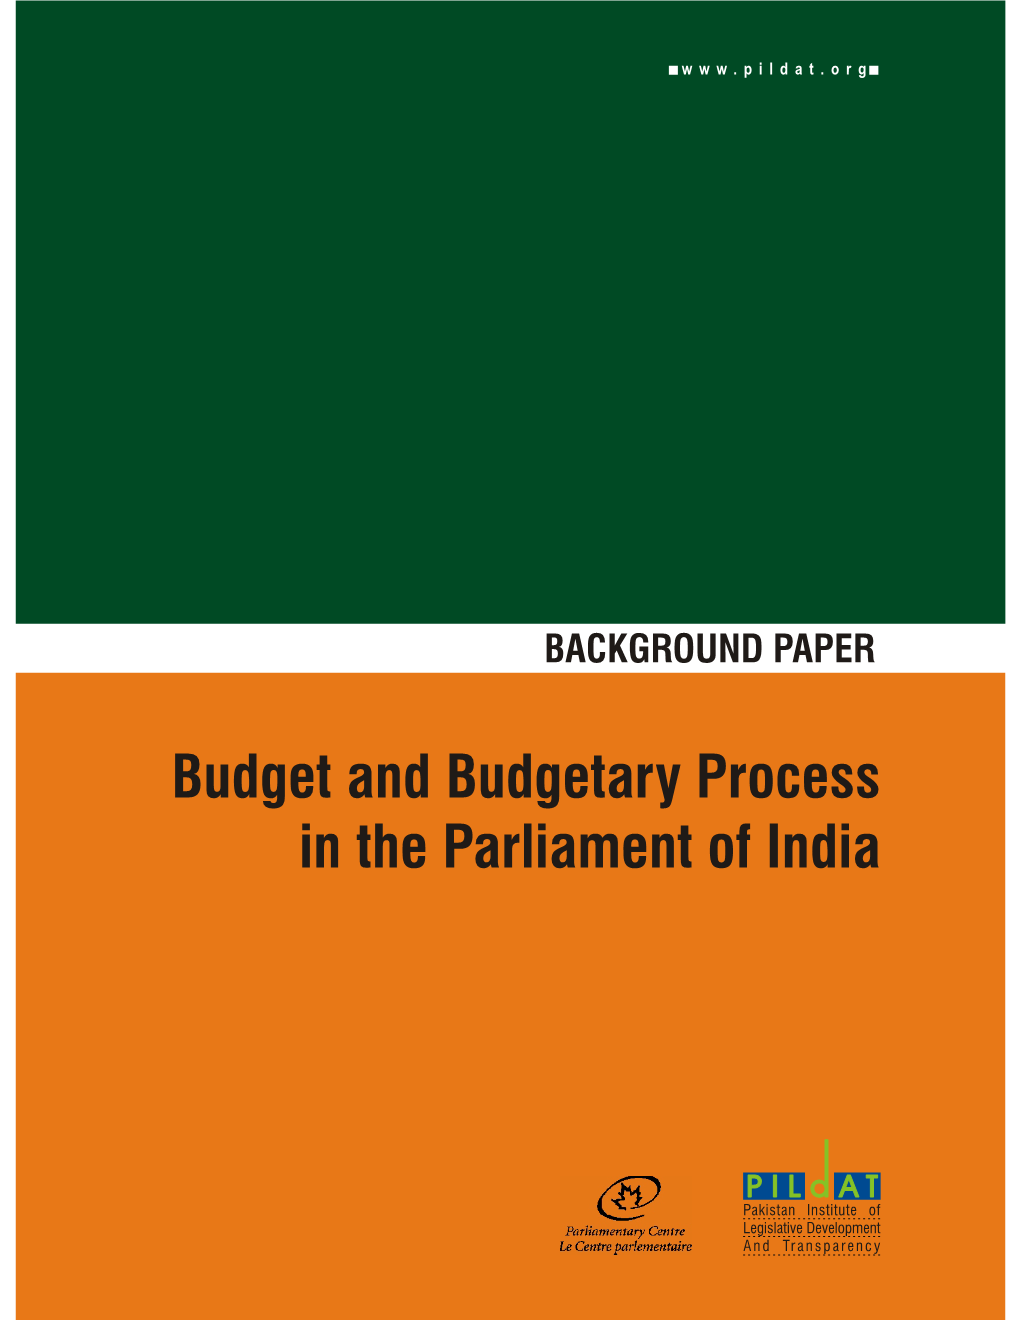 Budget and Budgetary Process in the Parliament of India 06052010